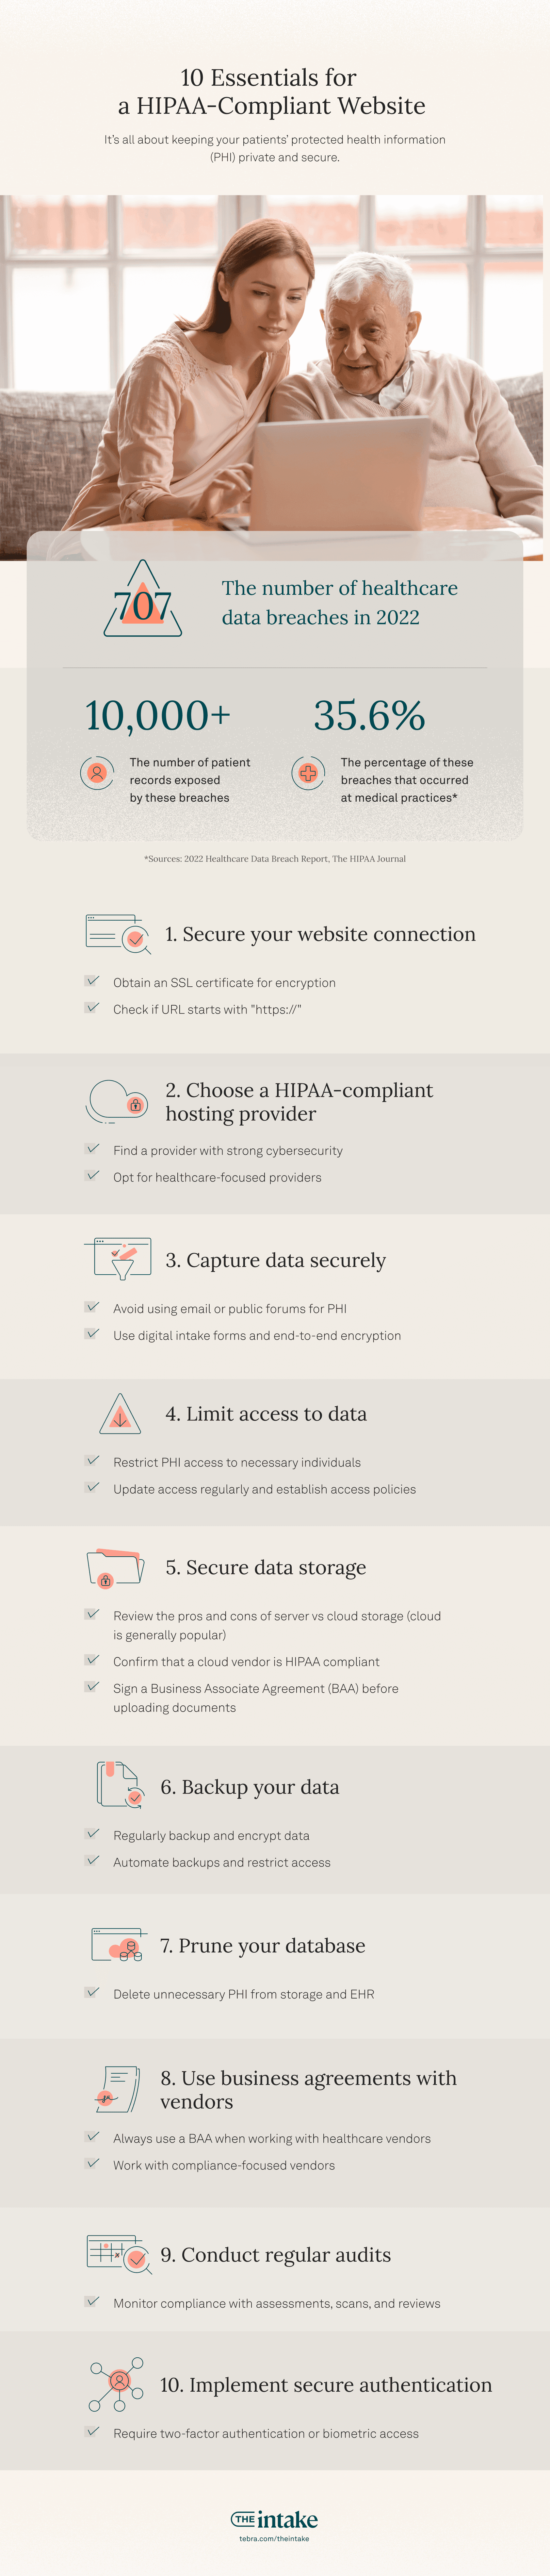 10 essentials for a HIPAA-compliant website graphic.